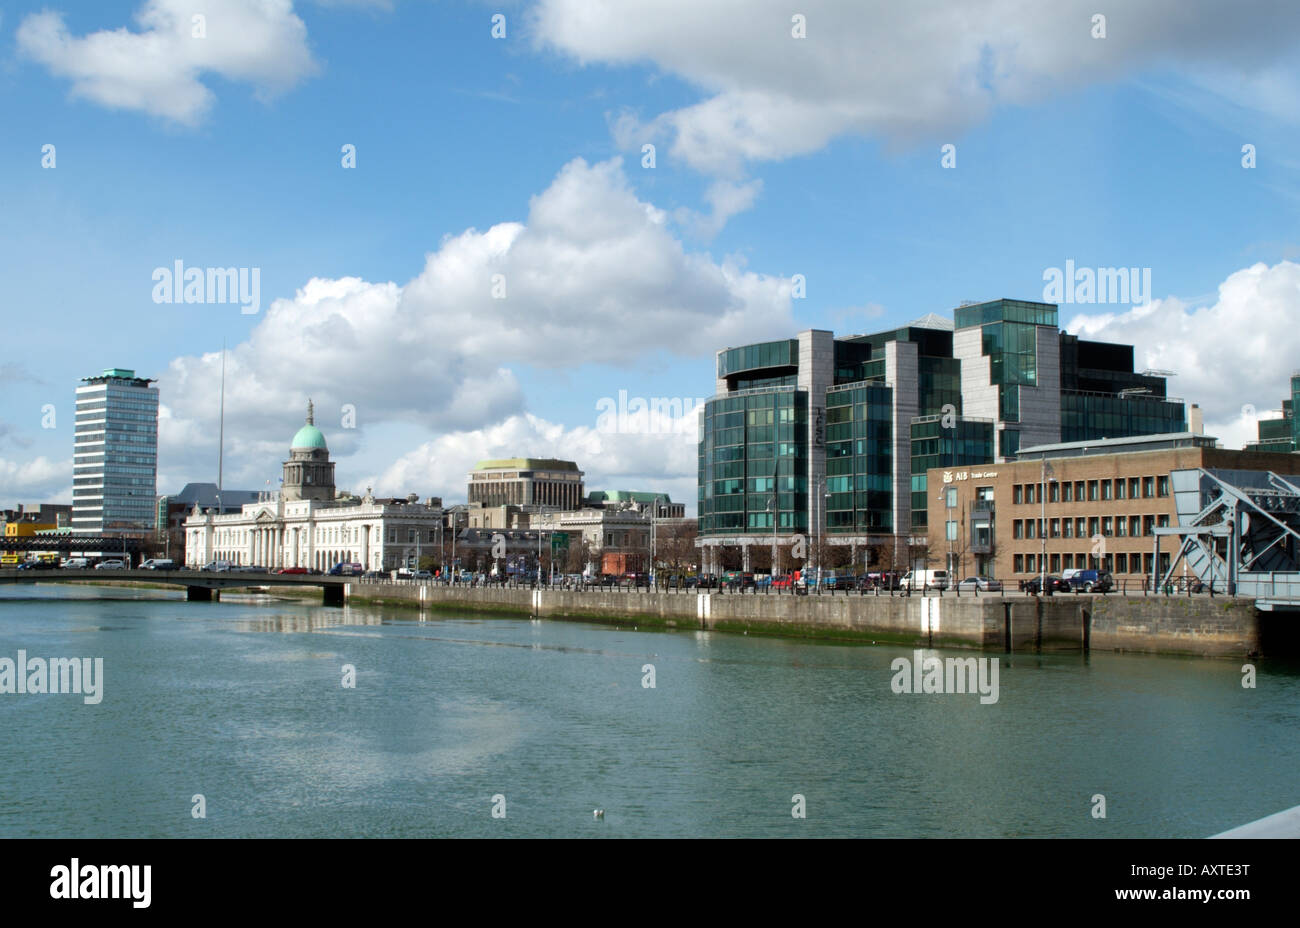 IFSC House and the AIB Trade Centre Building seen from the Sean O Casey Pedestrian Bridge over the River Liffey Dublin Ireland Stock Photo